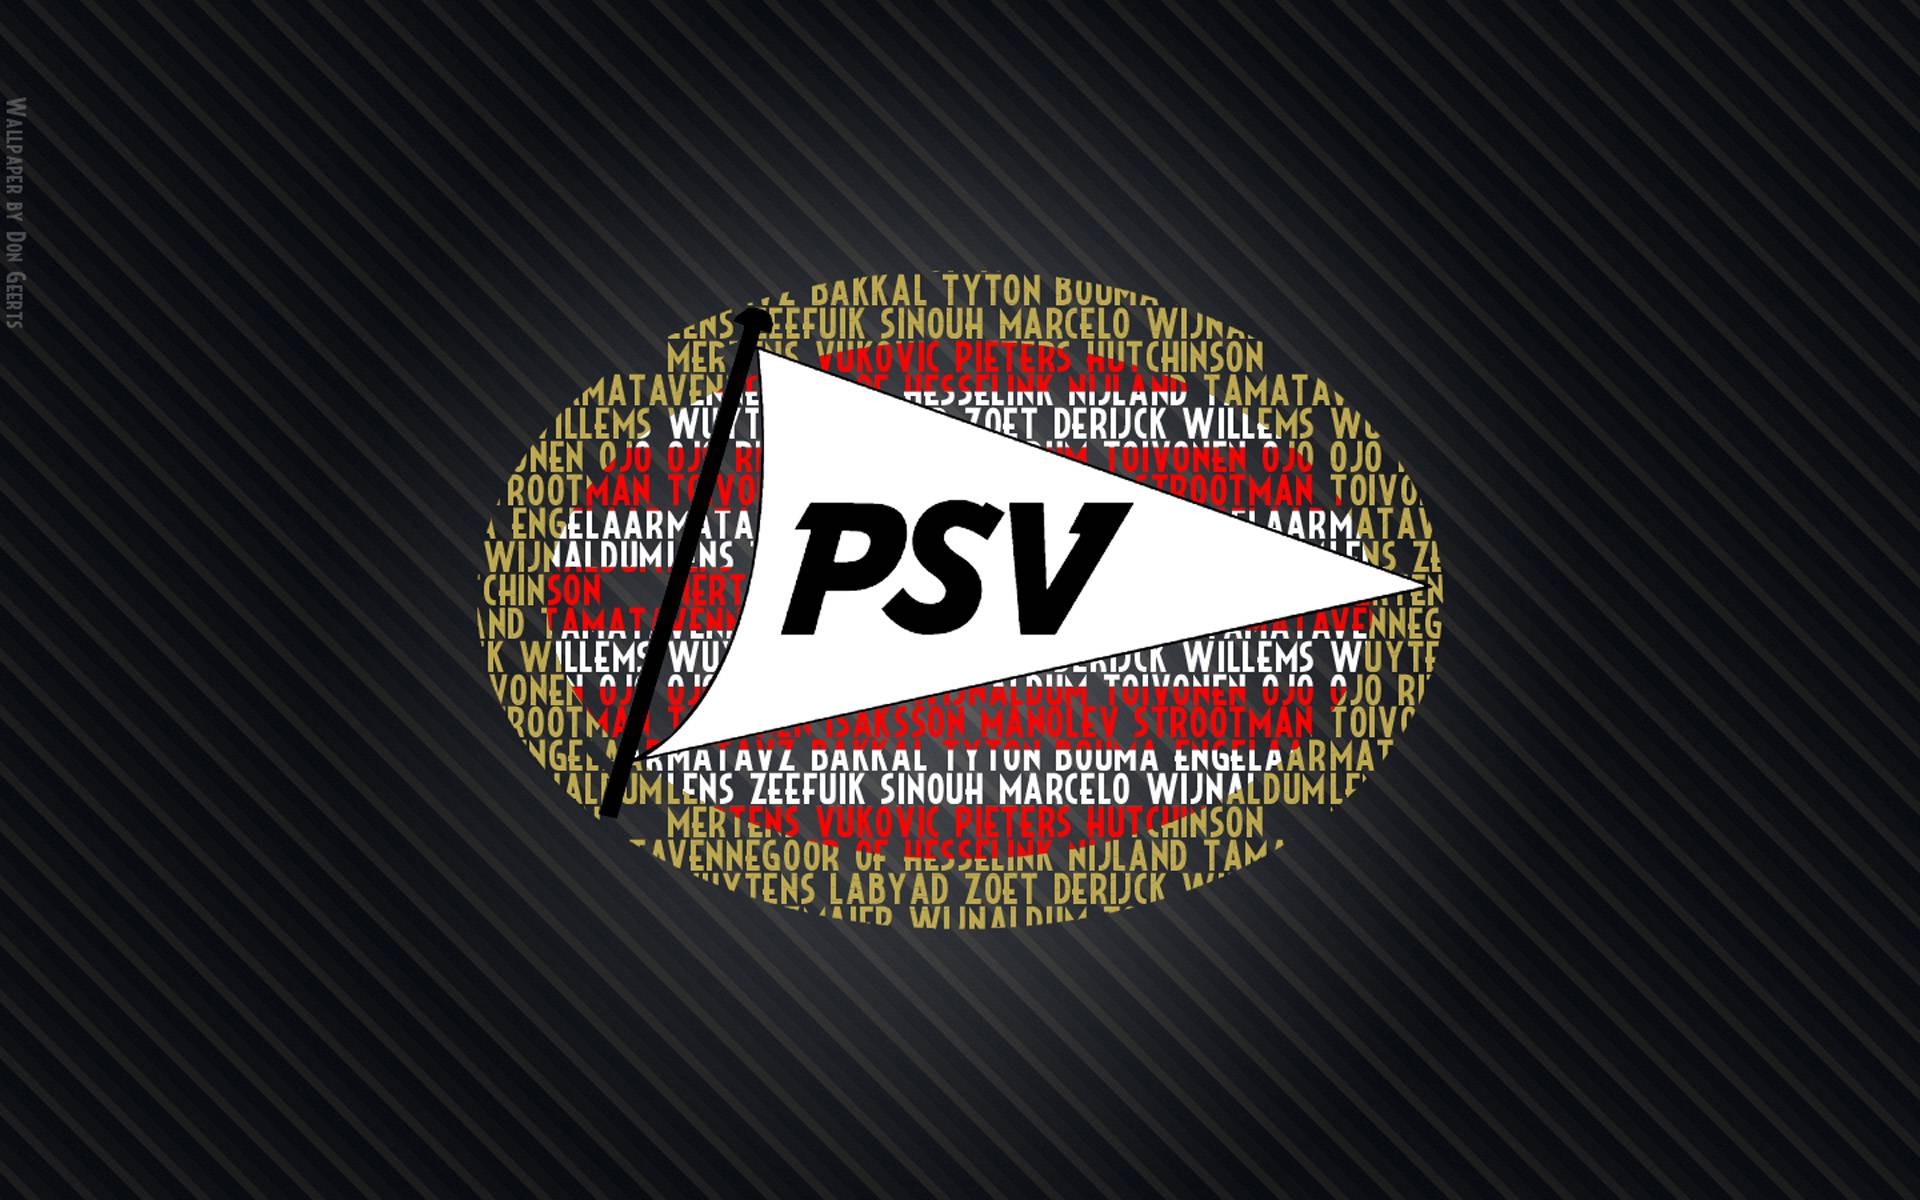 New Psv Wallpaper iPhone Great Foofball Club